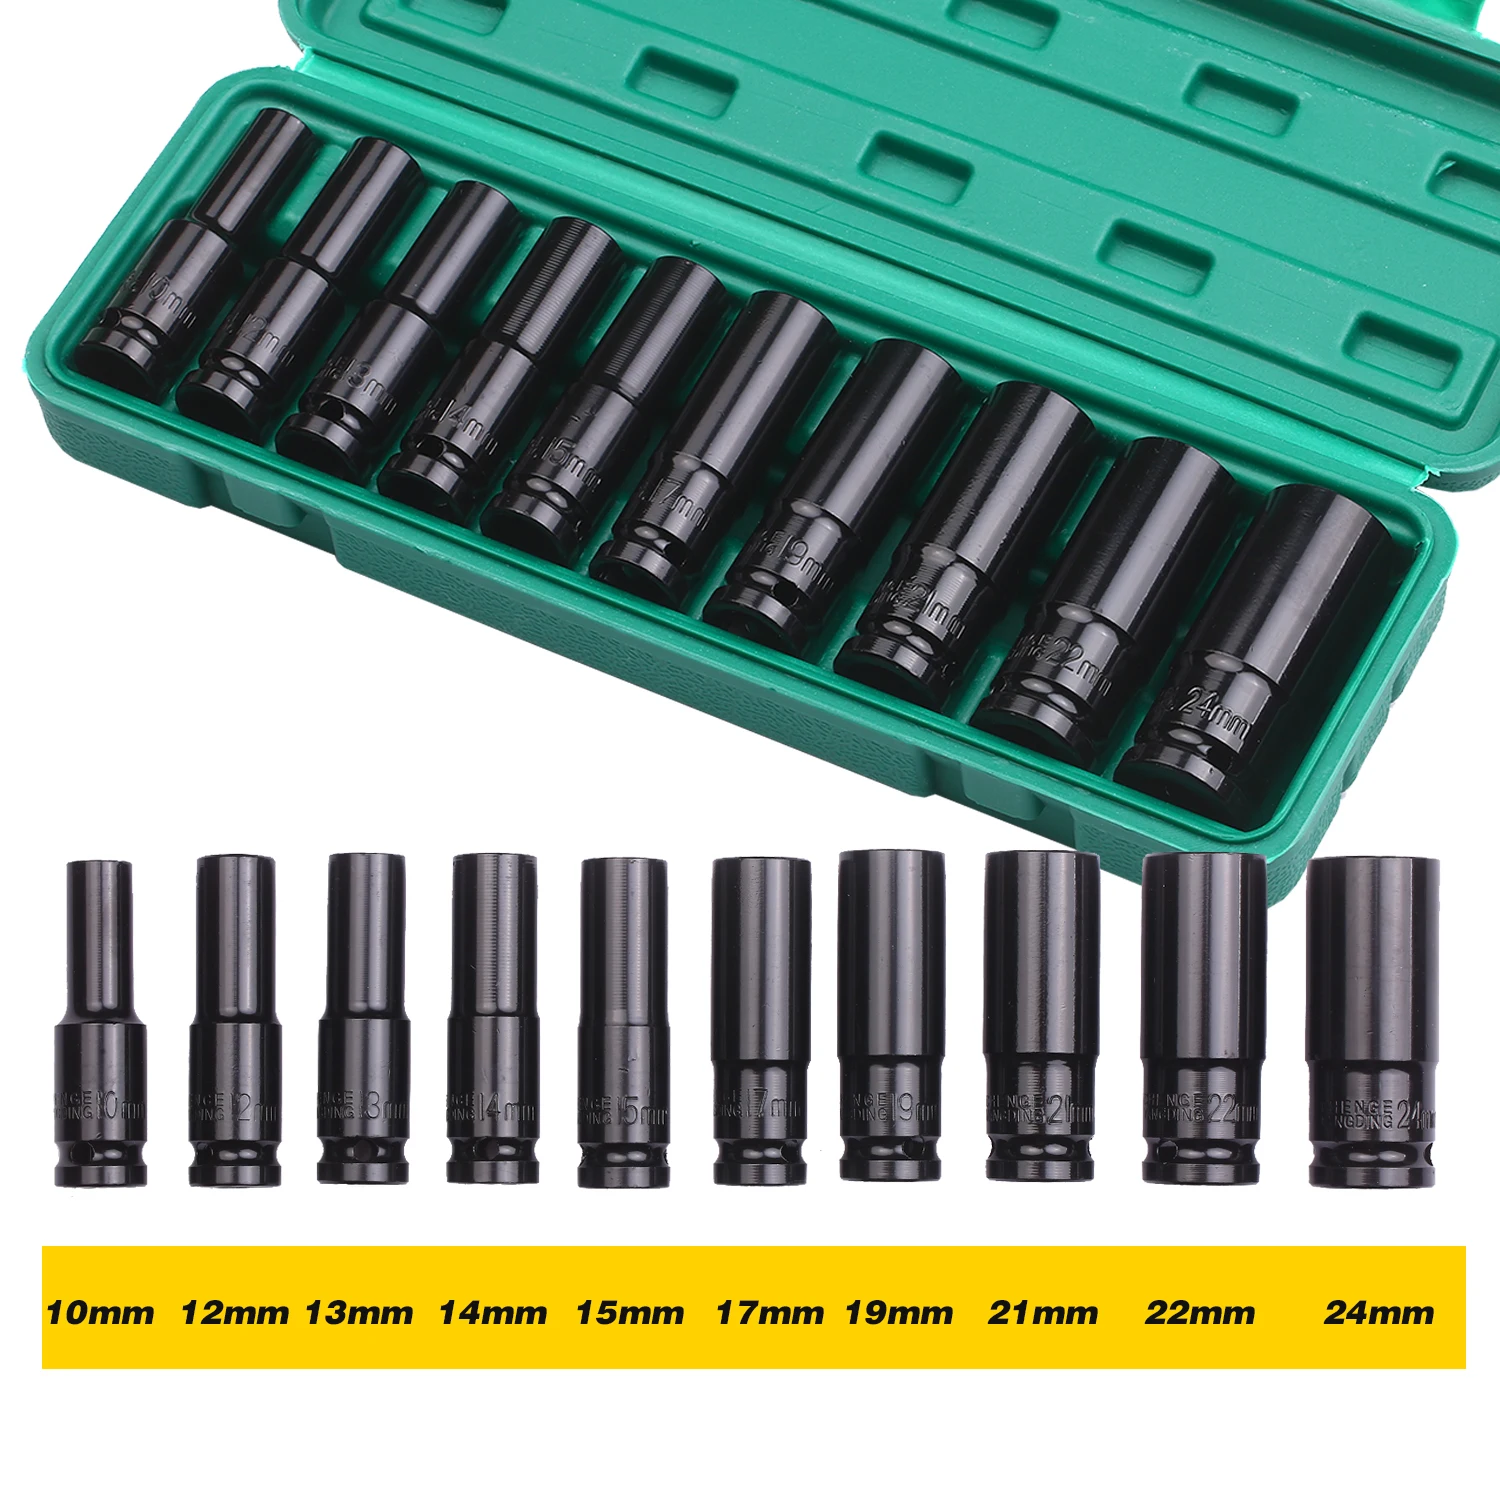 

1/2Inch Drive Hex Impact Electric Wrench Socket Set 10PCS Deep Socket Metric Sizes 10-24mm Carbon Steel with Hard Storage Box